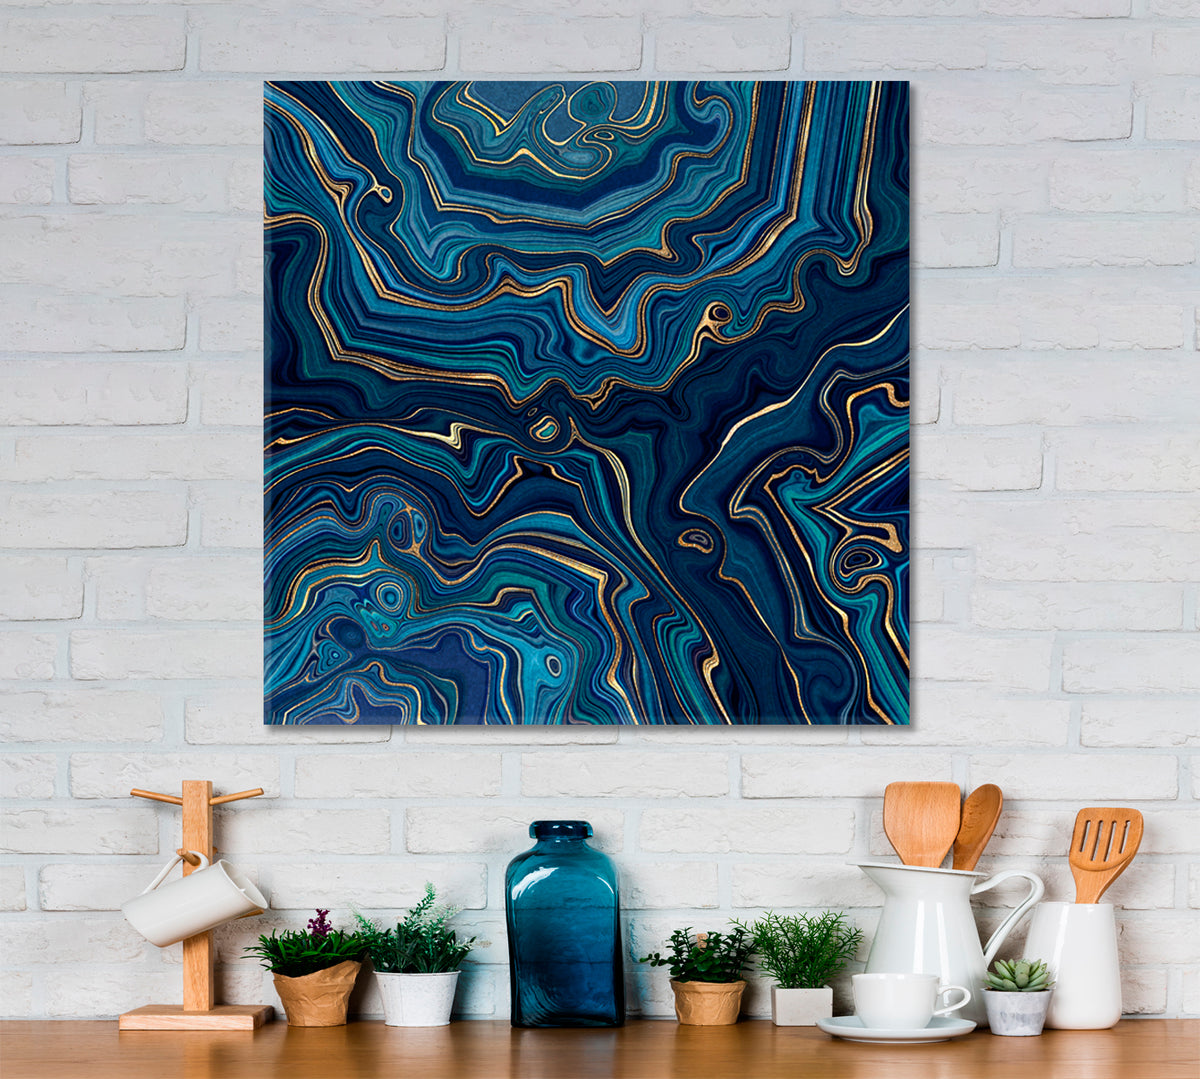 Dark Blue And Gold Abstract Marble Effect Canvas Print - Square Abstract Art Print Artesty 1 Panel 12"x12" 